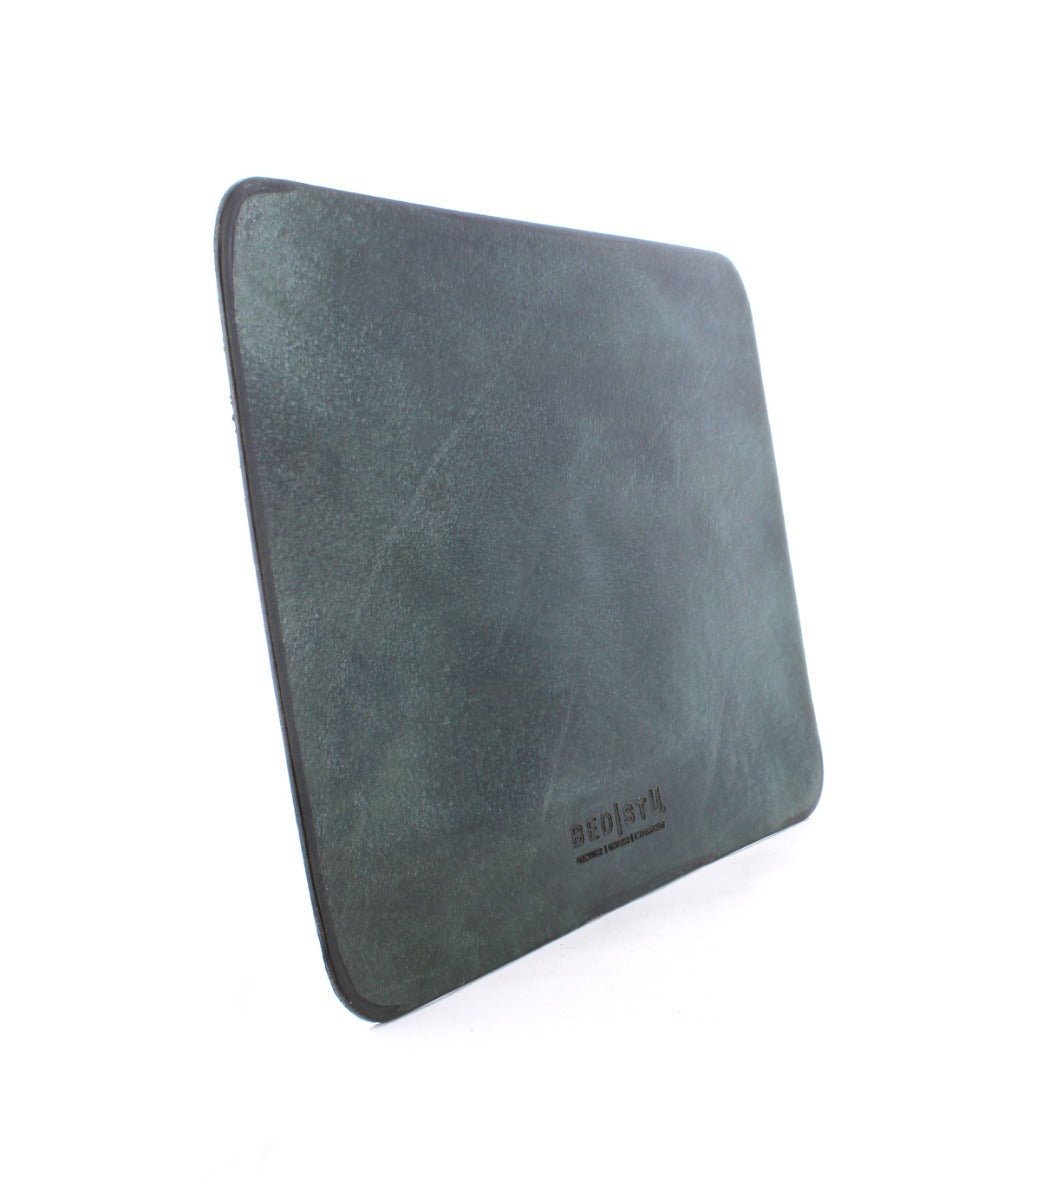 A Bed Stu Launcher laptop sleeve on a white background.